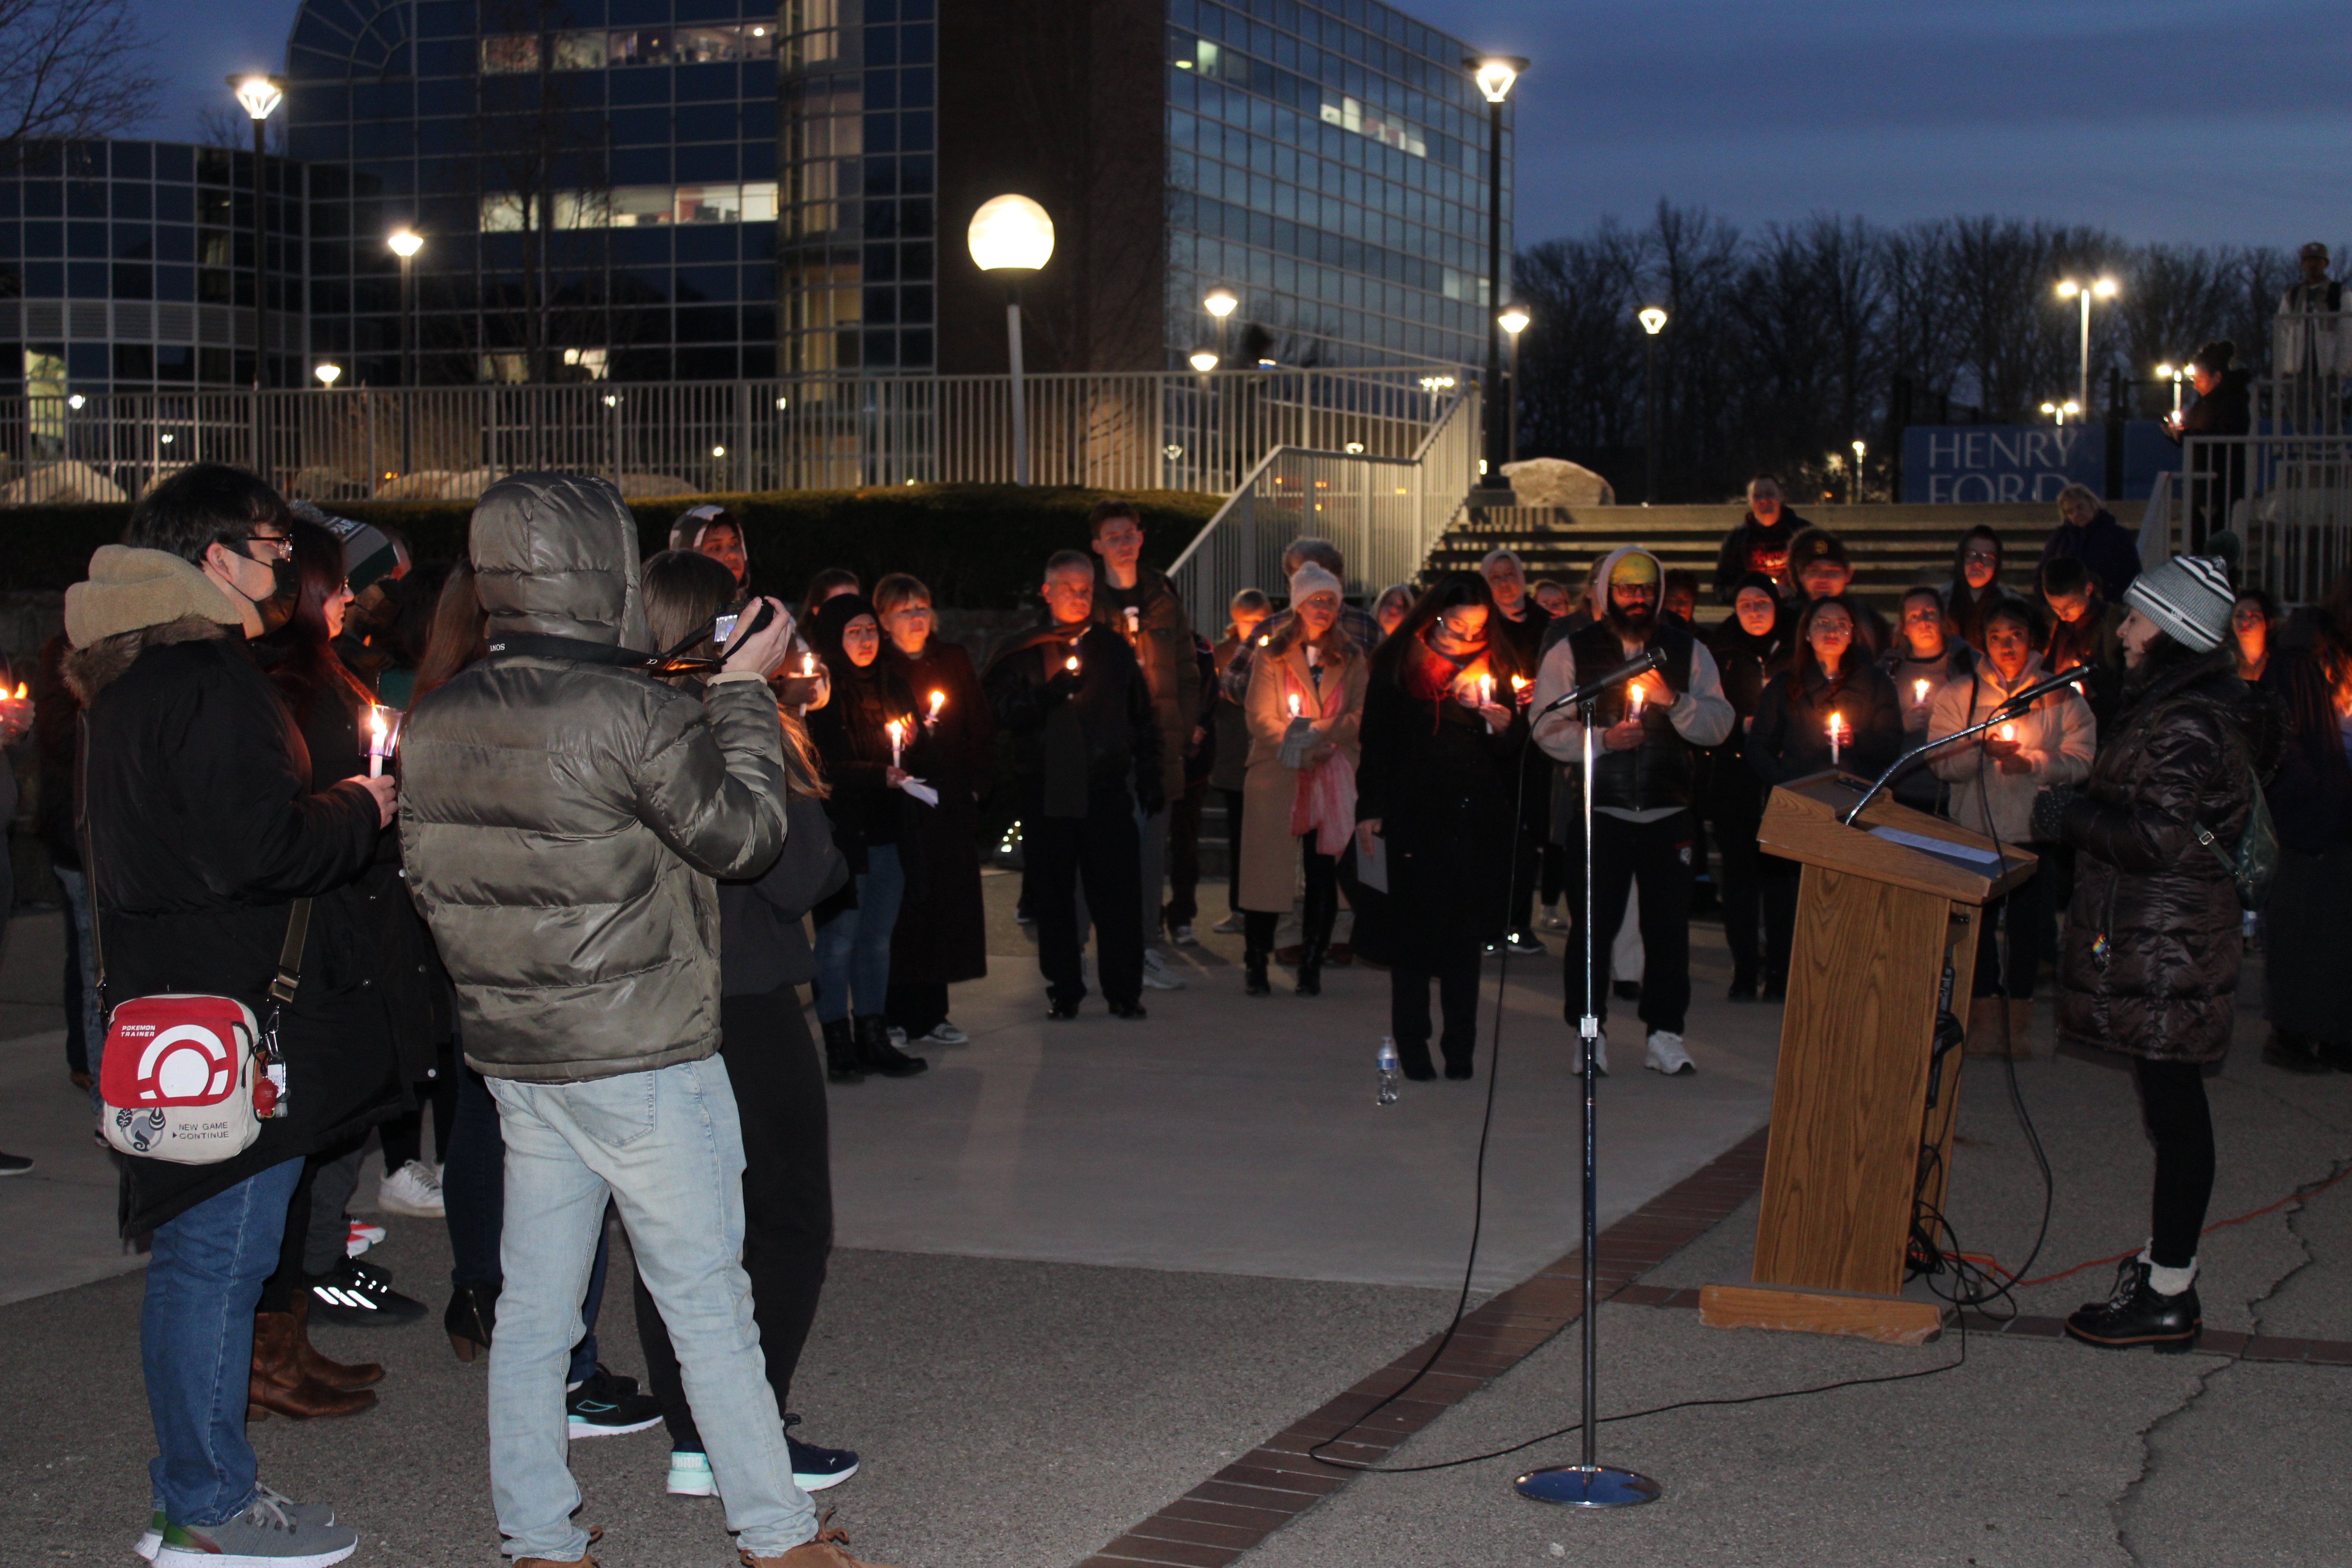 Students, staff, and faculty gather at Henry Ford College in Dearborn, Michigan, for a vigil on Feb. 20, 2023, remembering the victims of the MSU school shooting. Photo by Ashley Davis